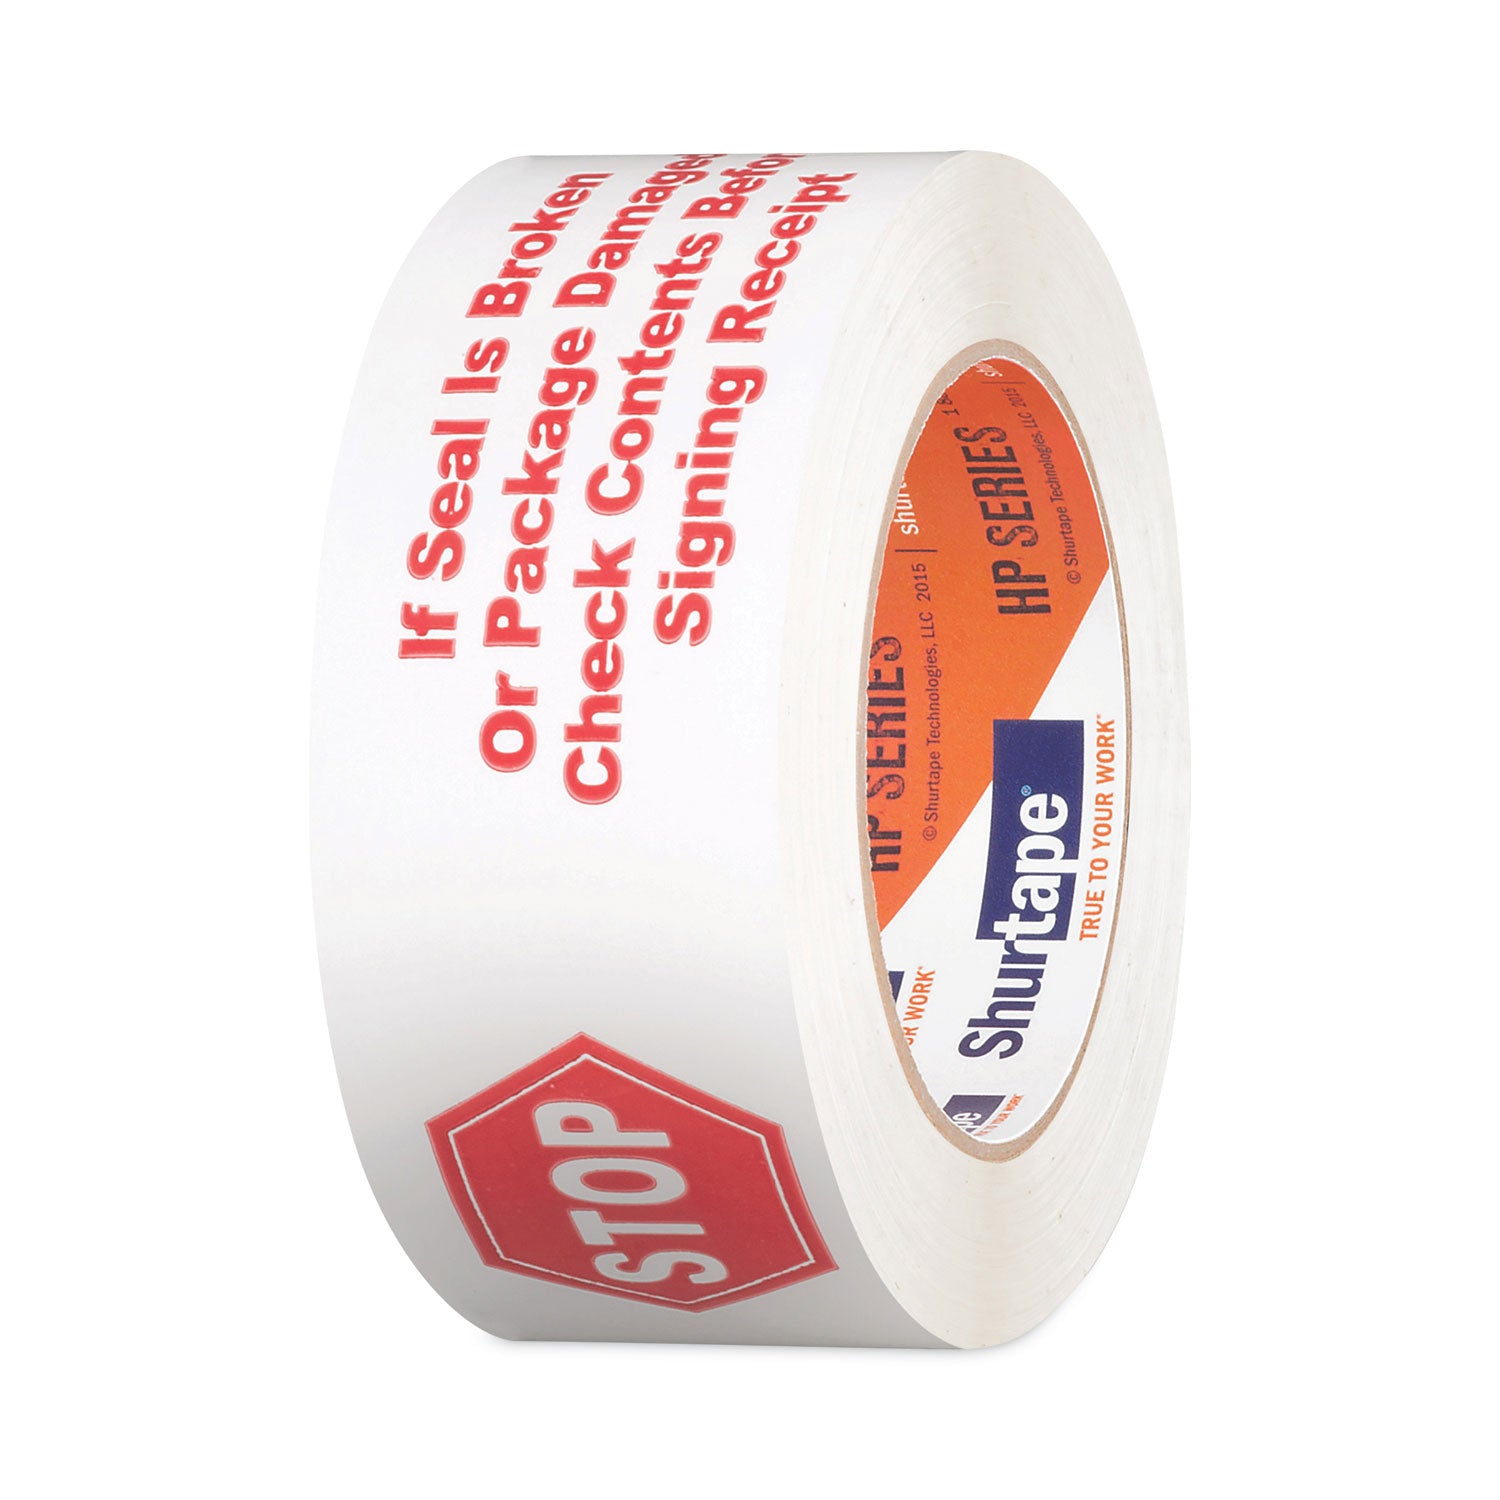 hp-240-packing-tape-188-x-10936-yds-white-with-red-print-36-carton_shu124152 - 2